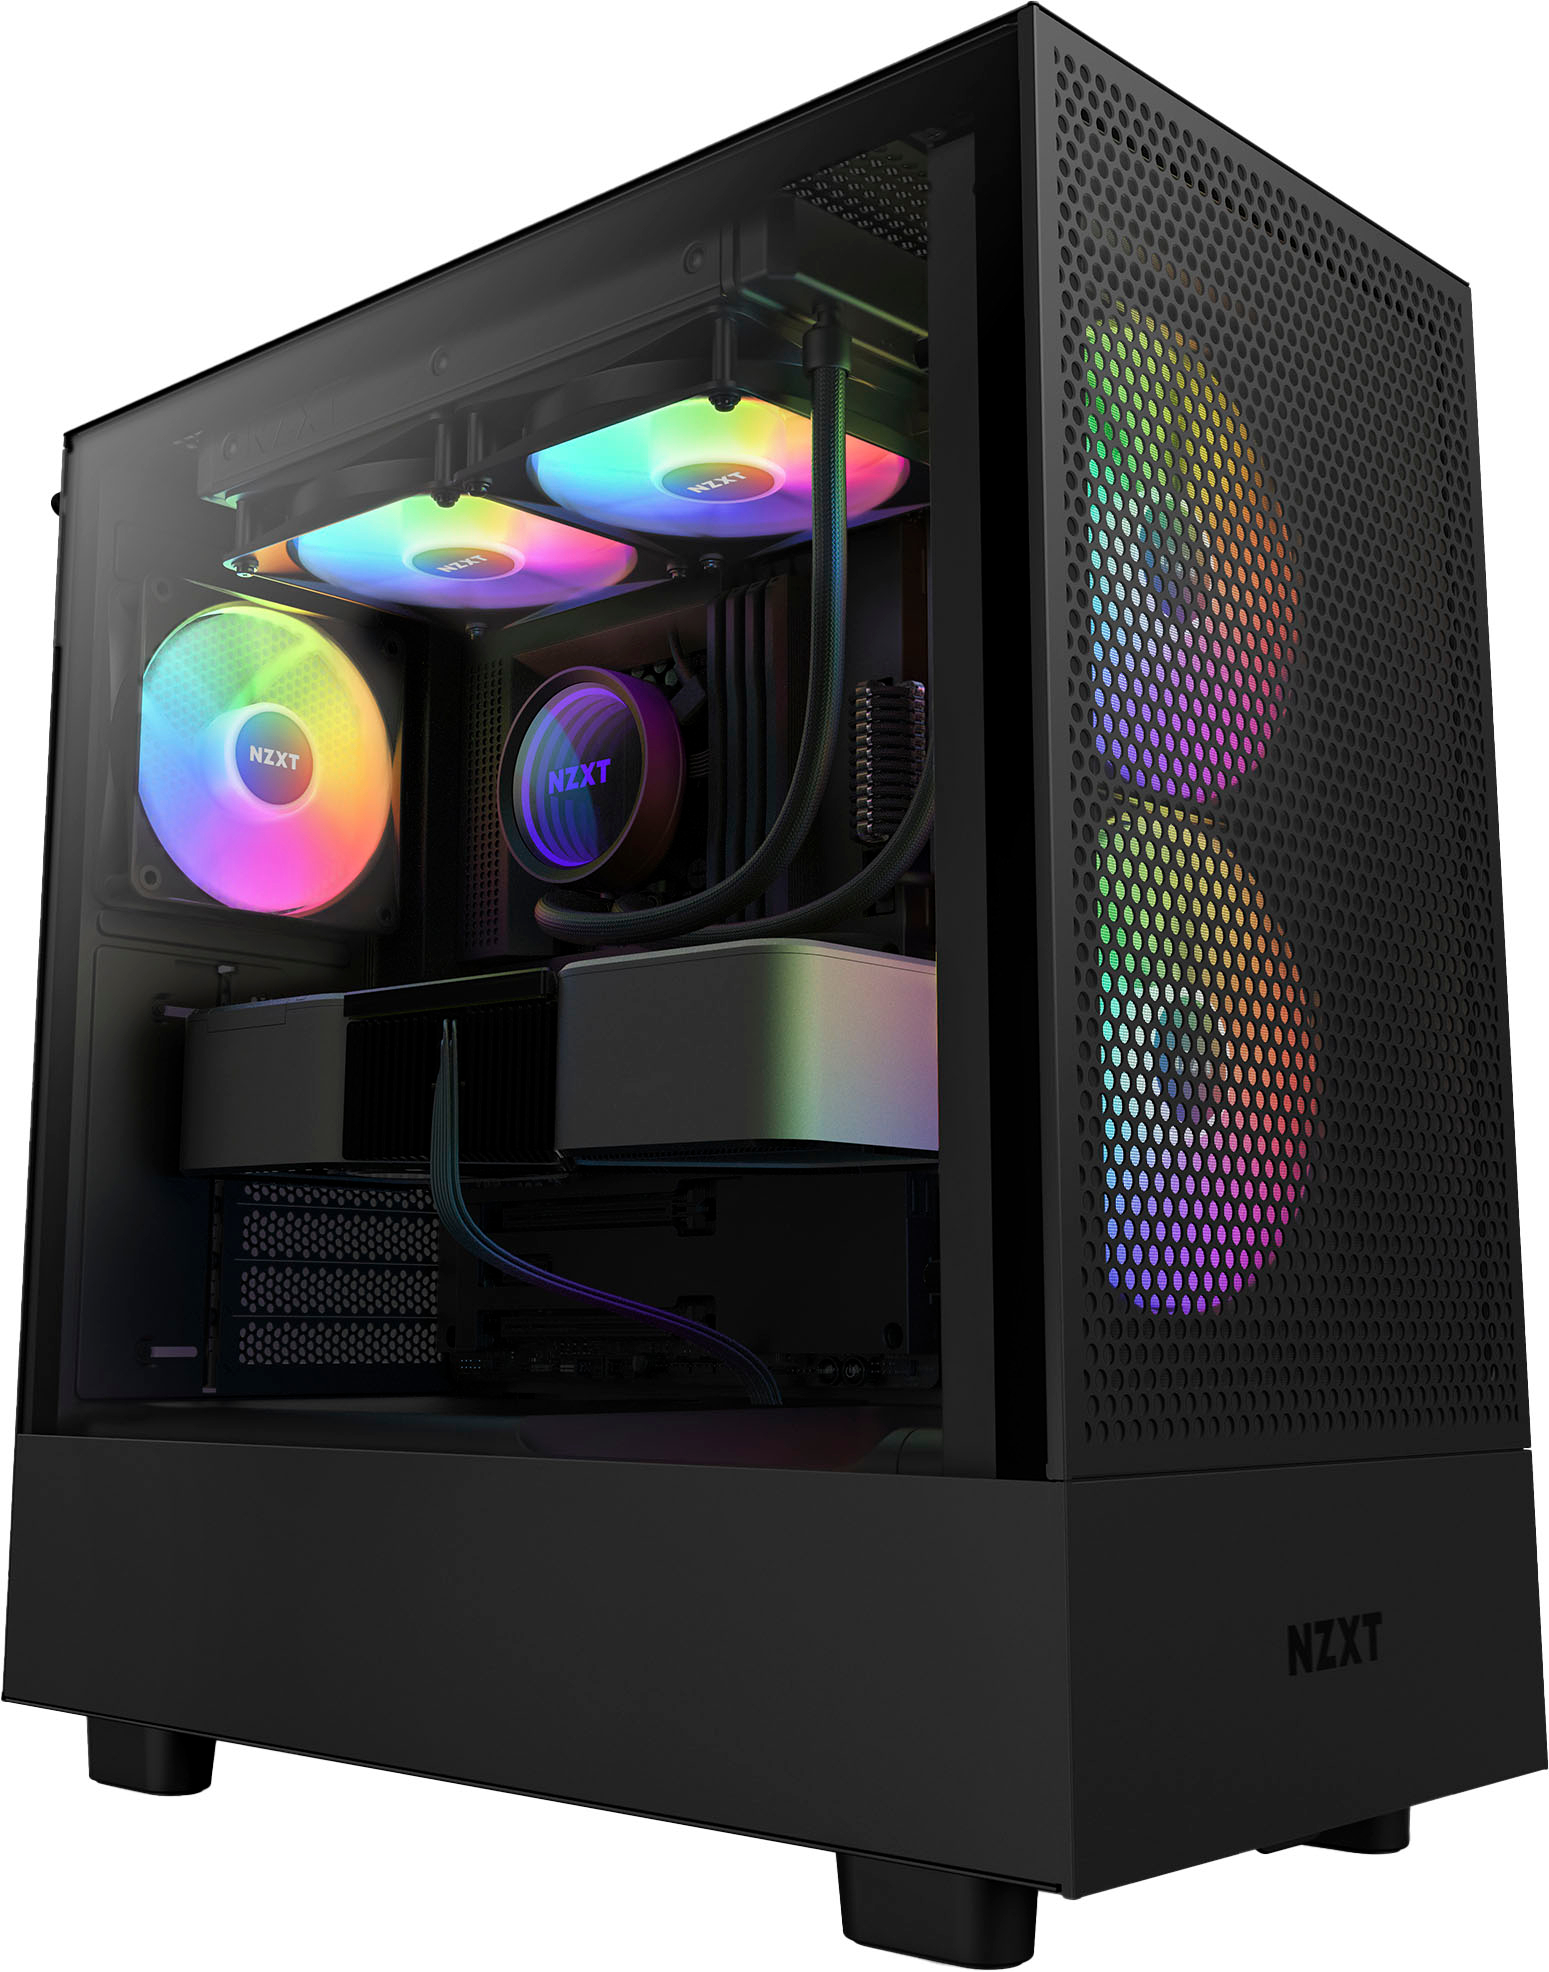 NZXT H6 Flow RGB ATX Mid-Tower Case with Dual Chamber White CC-H61FW-R1 -  Best Buy